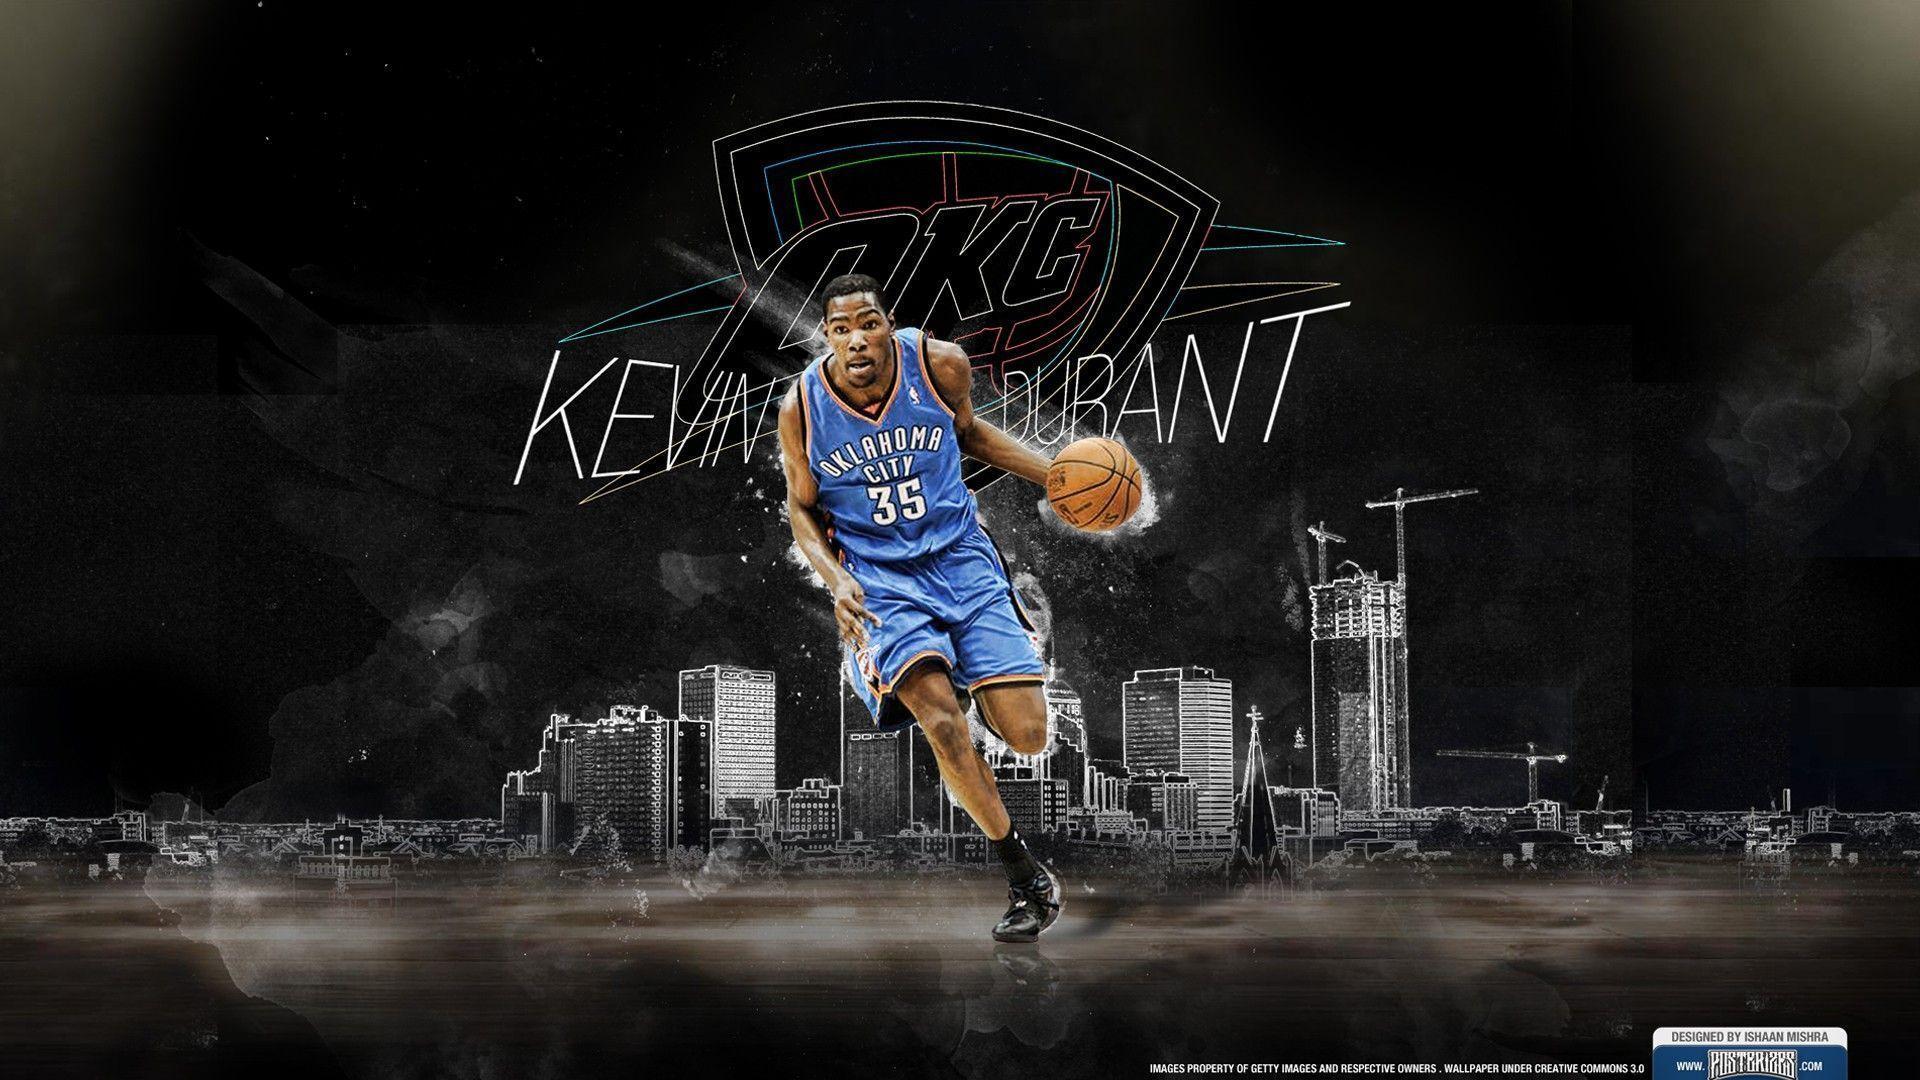 Kevin Durant 2014 Full HD Wallpaper. All Kinds of Sports